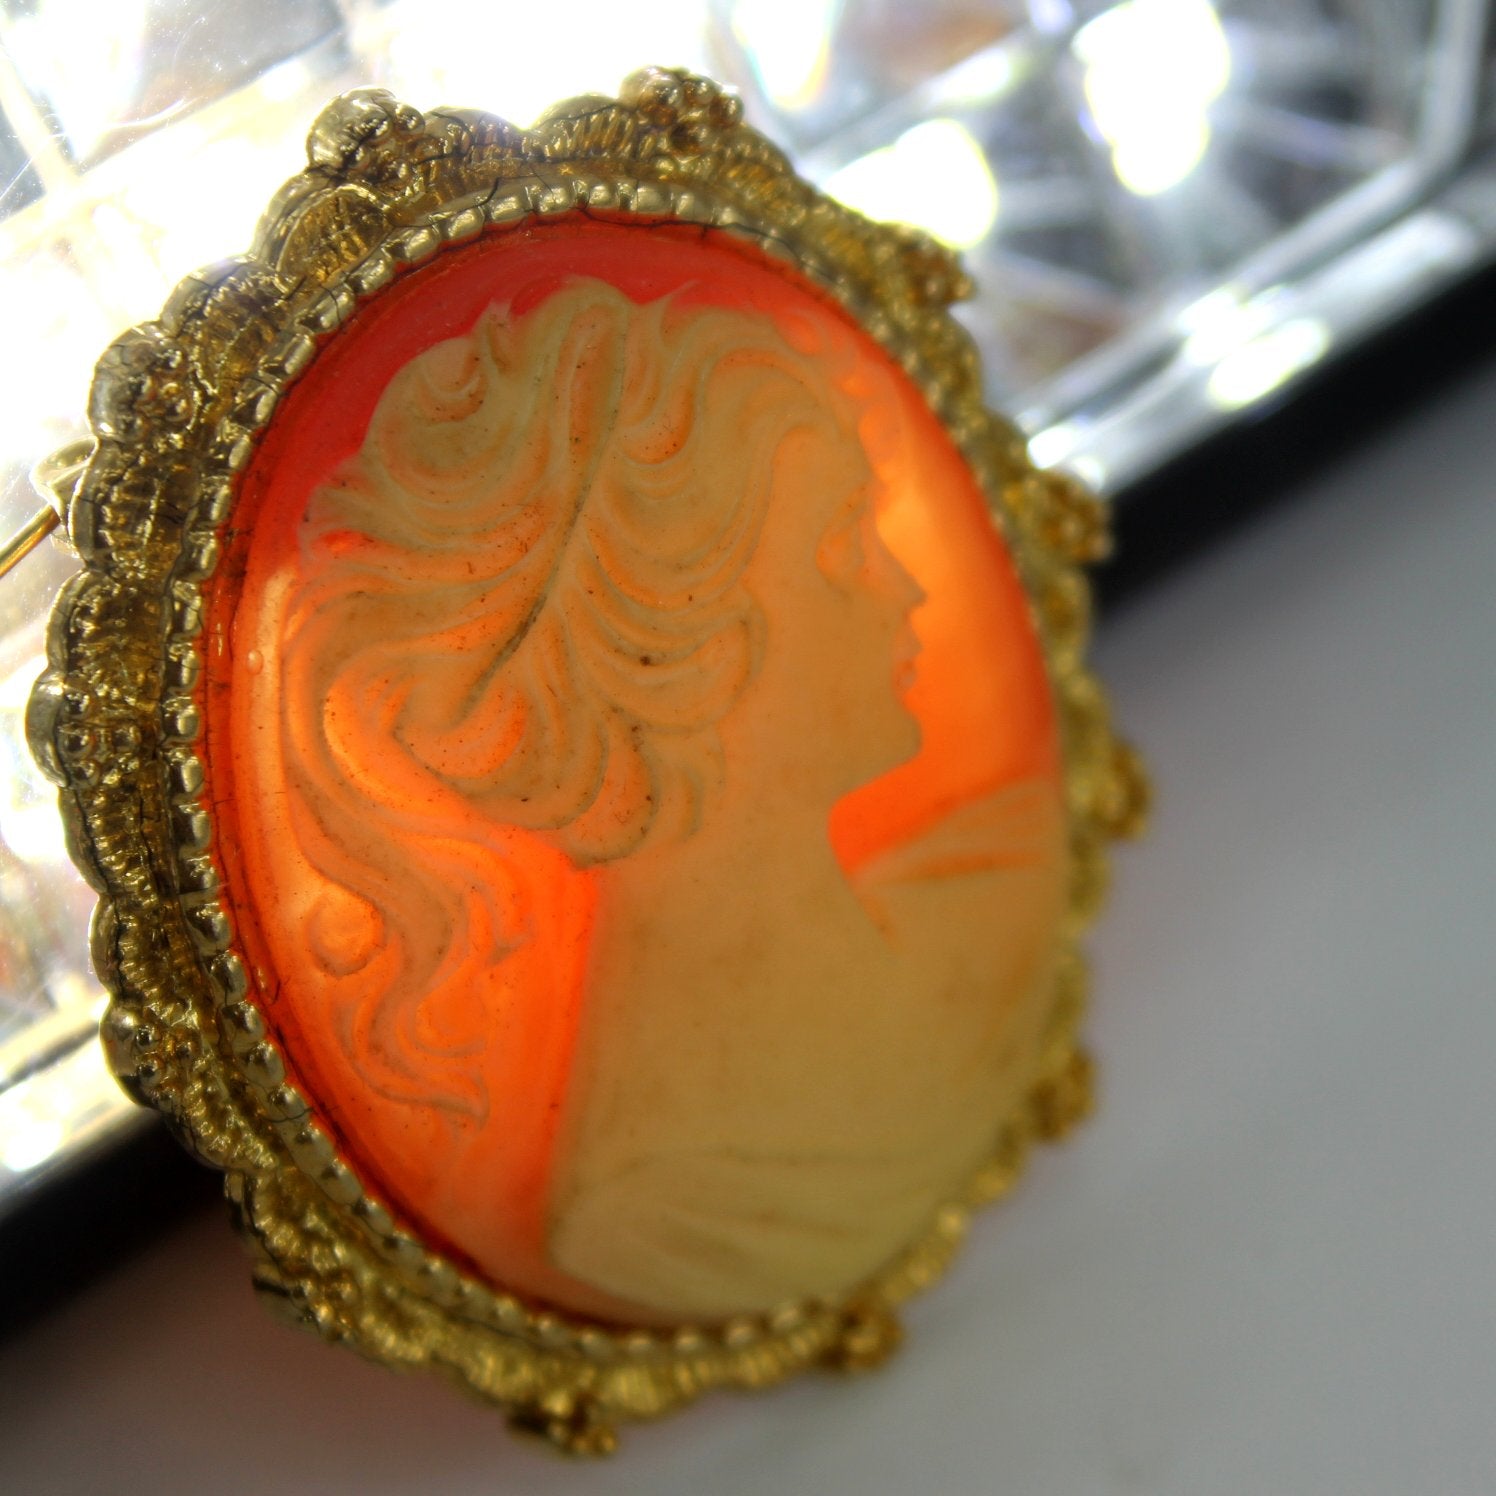 AAI Accessories Associates Inc Cameo Pin Brooch 1980s light behine photo showing quality resin